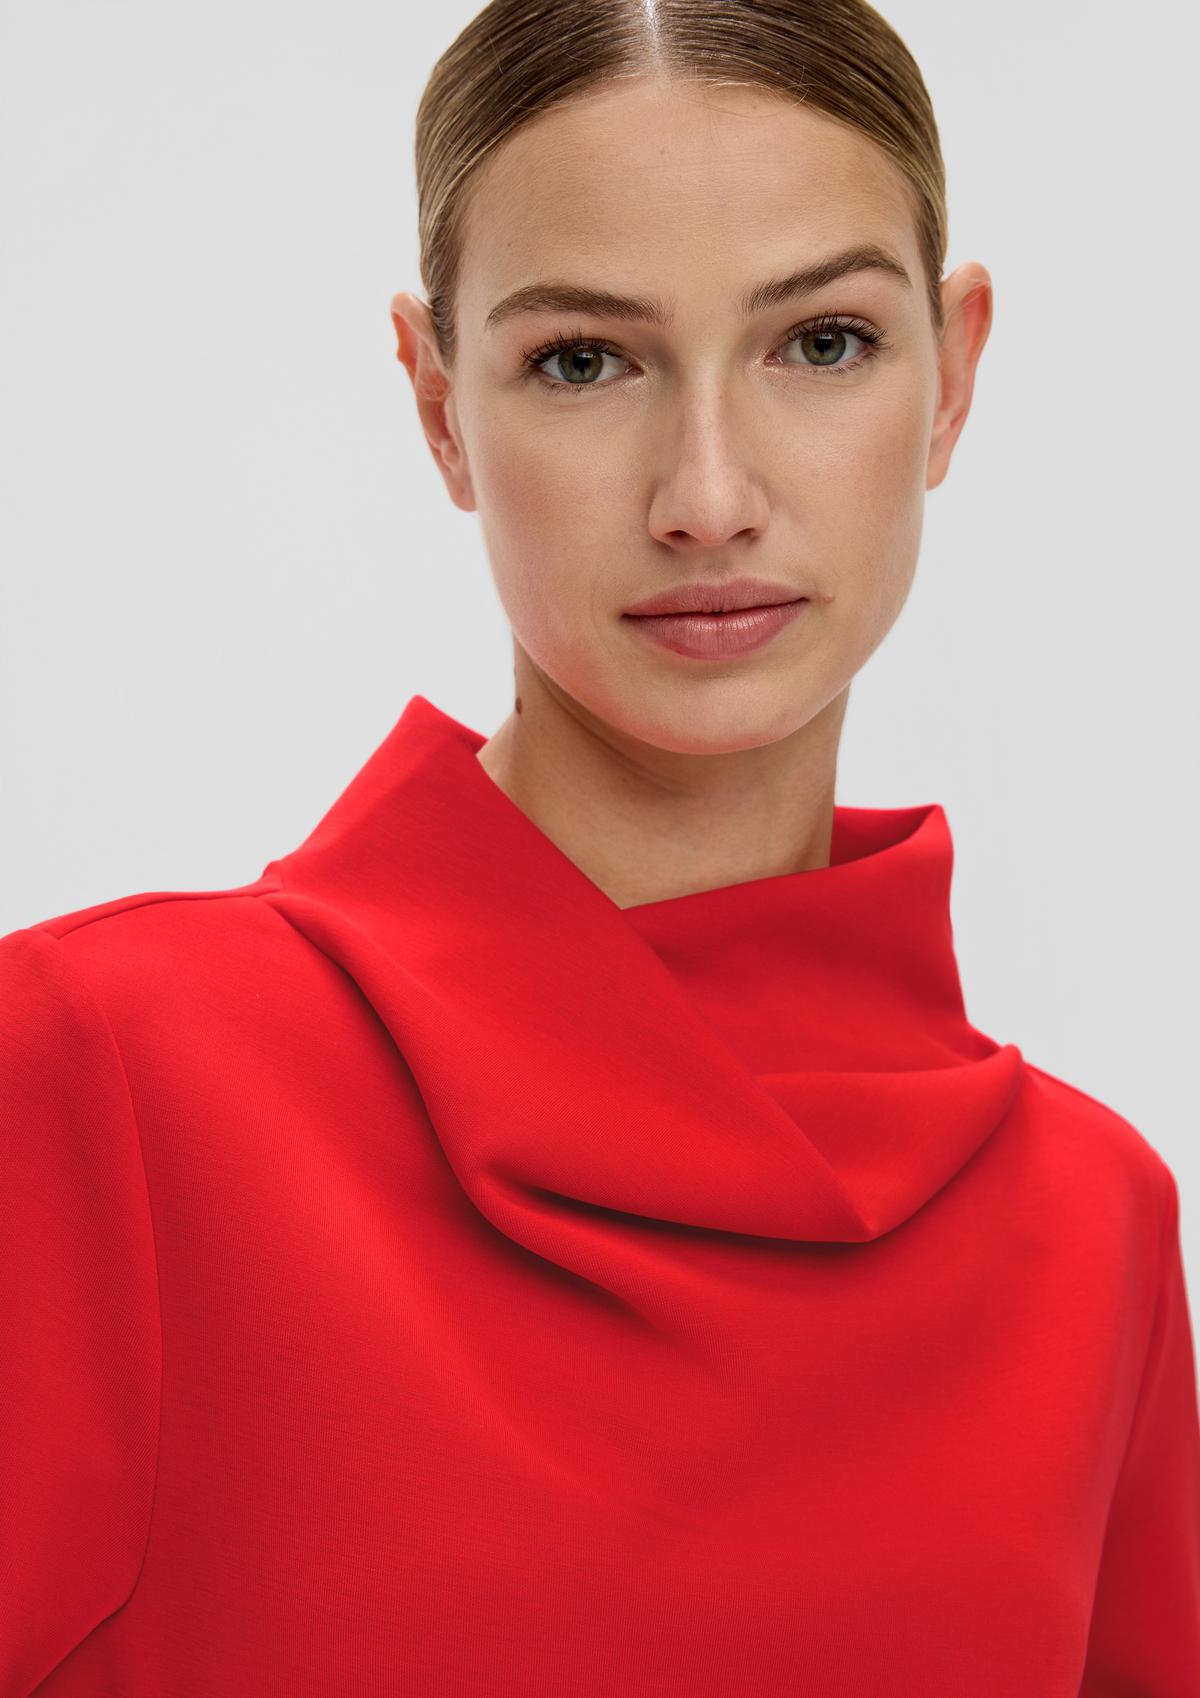 s.Oliver Scuba sweatshirt with a draped collar